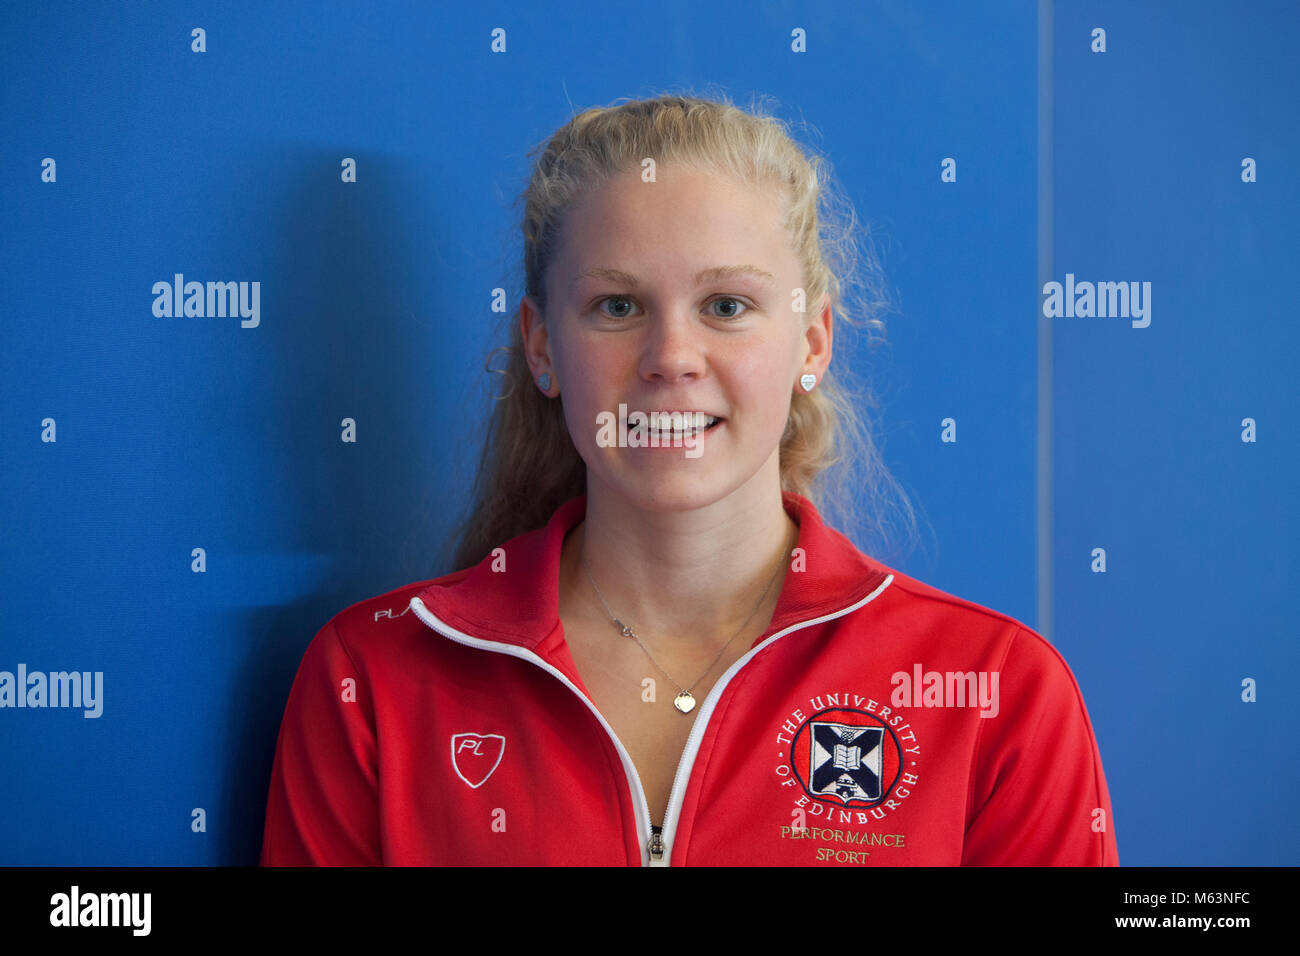 Edinburgh, Scotland 28th February 2018. Elite swimmers from the University of Edinburgh will be among those competing at the event, which takes place at the Royal Commonwealth Pool, from Thursday to Sunday (1-4 March). Picture: Lucy Hope                                                                                                                                         Pako Mera/Alamy Live News Stock Photo